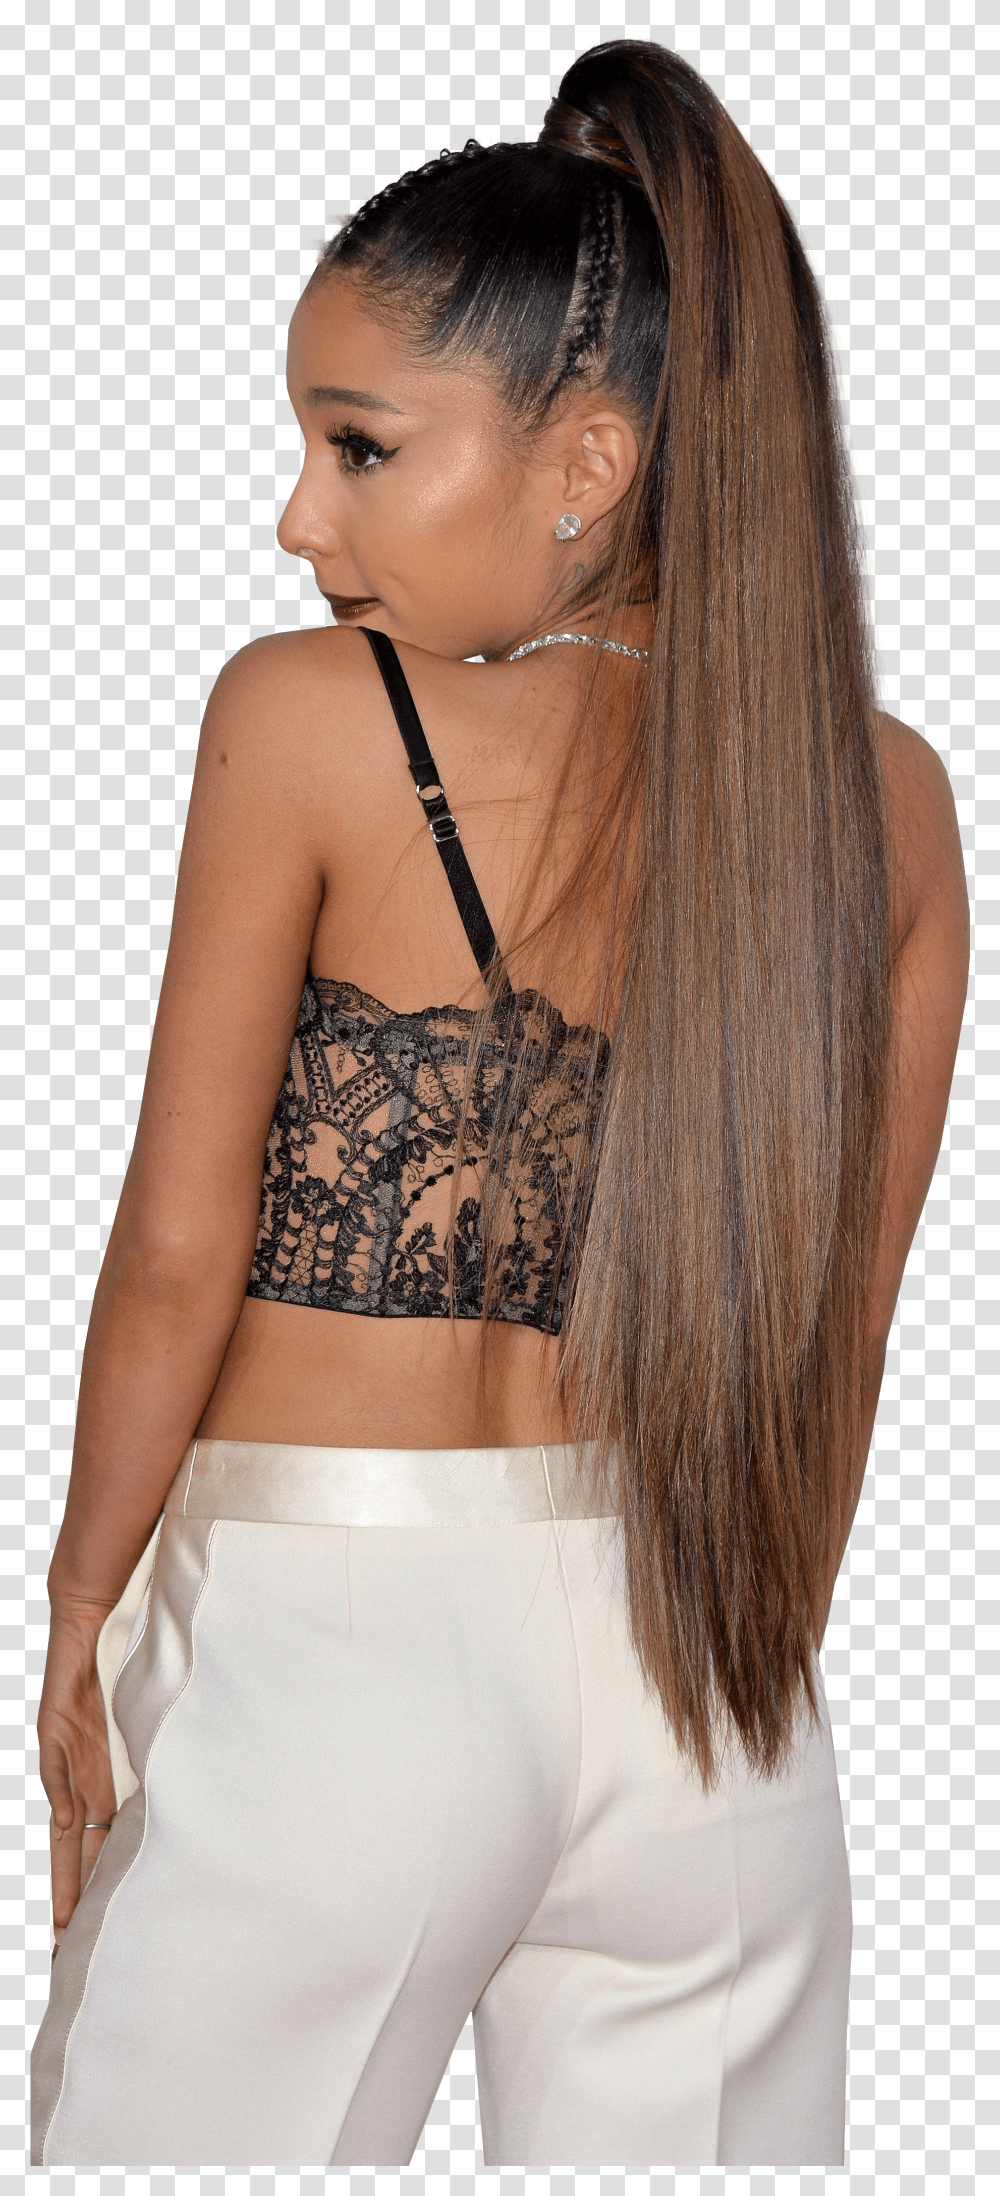 Download Ariana Grande In White Trousers Image For Free Girl Transparent Png